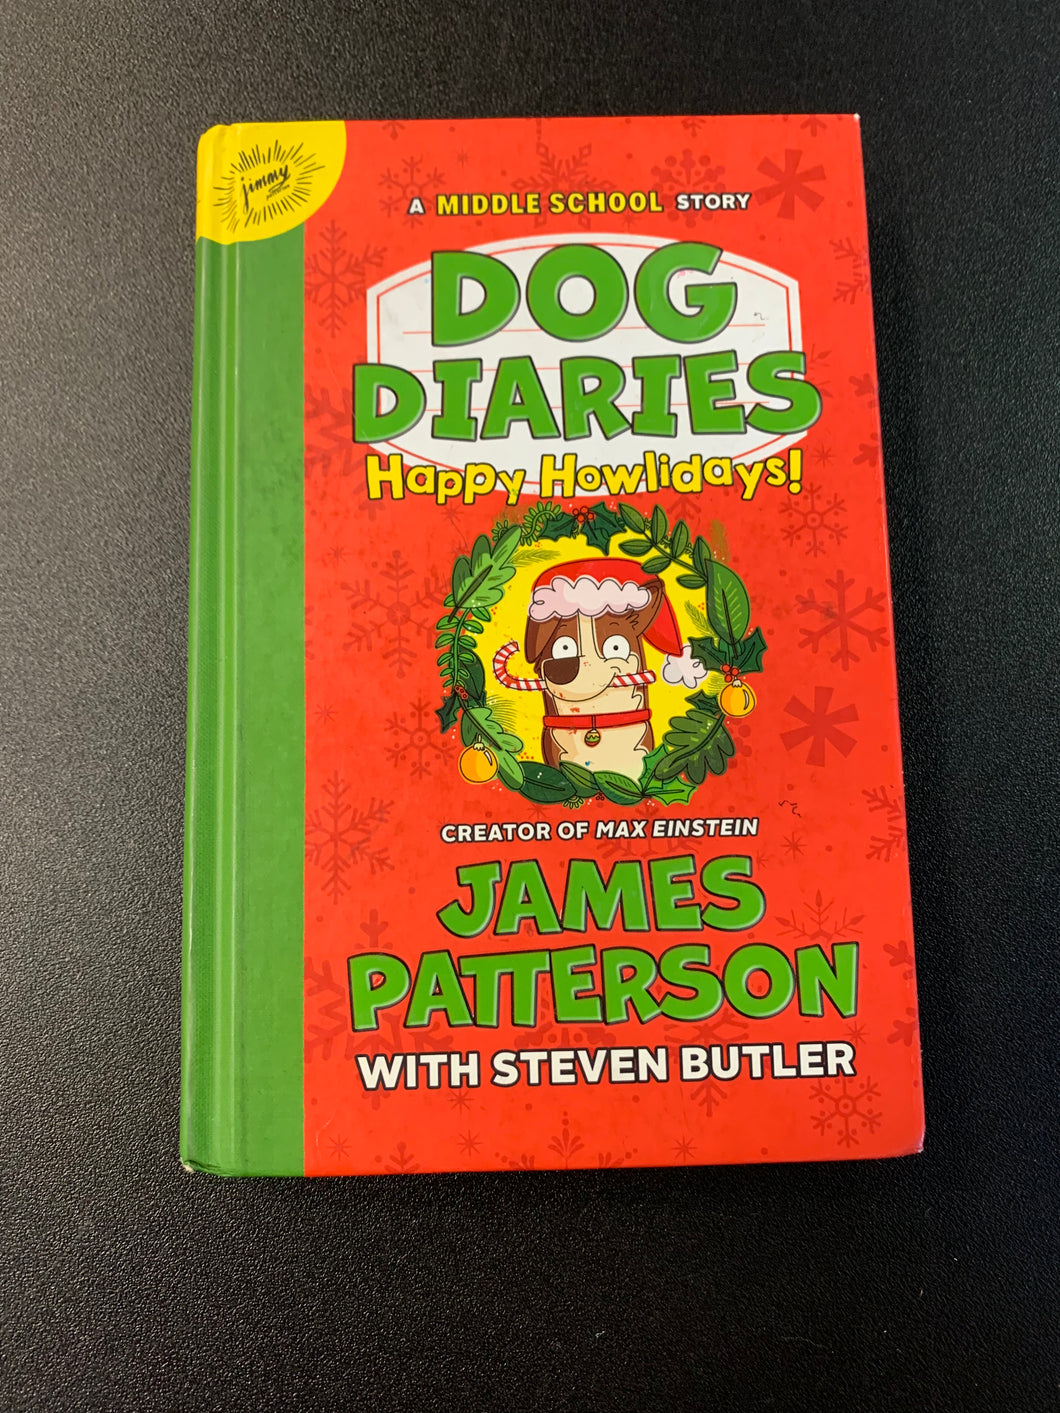 A MIDDLE SCHOOL STORY DOG DIARIES HAPPY HOWLIDAYS JAMES PATTERSON WITH STEVEN BUTLER PREOWNED